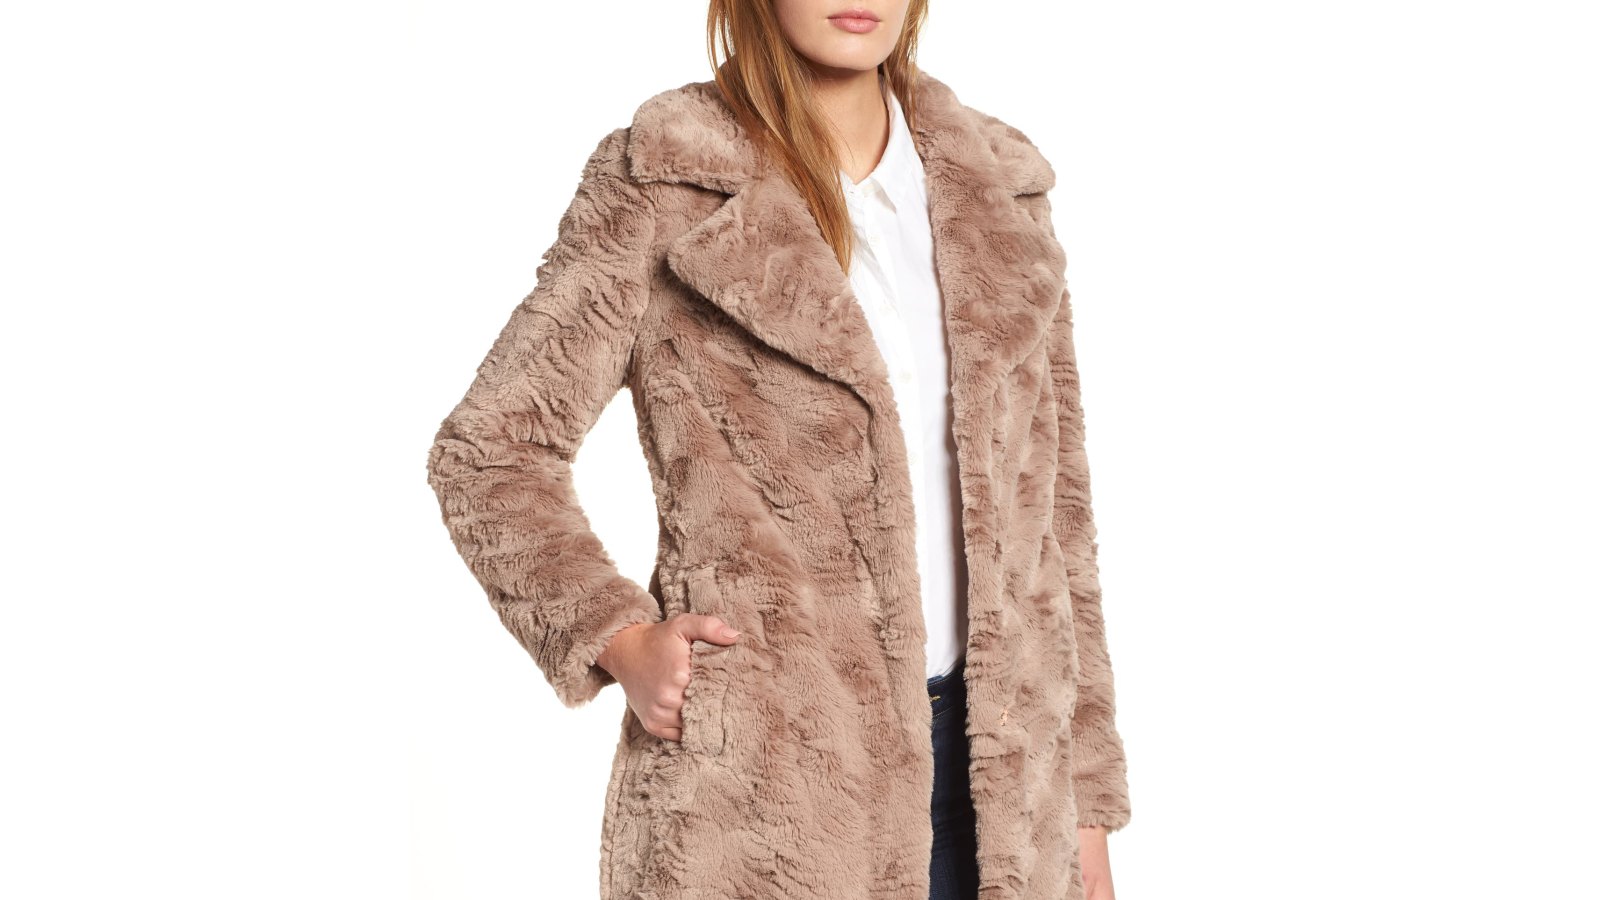 Kenneth Cole New York Textured Faux Fur Coat brown